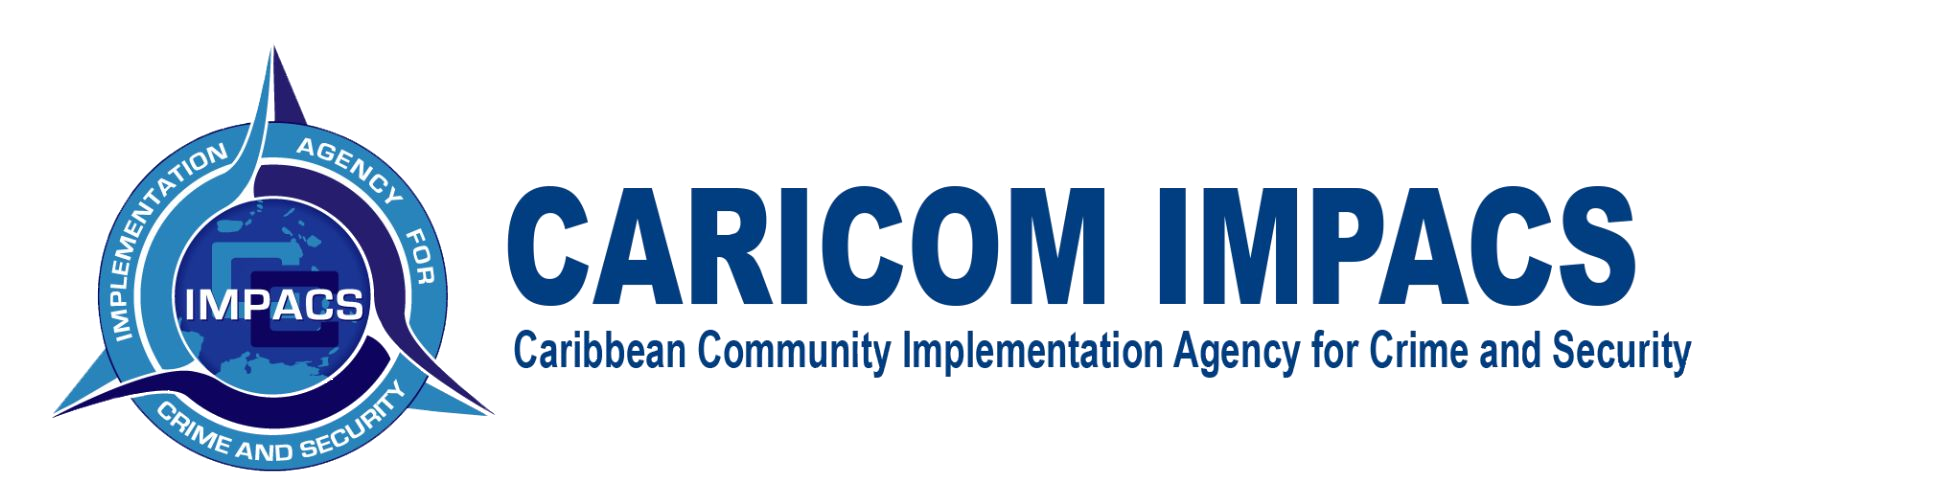 Caribbean Community Implementation Agency for Crime and Security – (CARICOM IMPACS) Logo